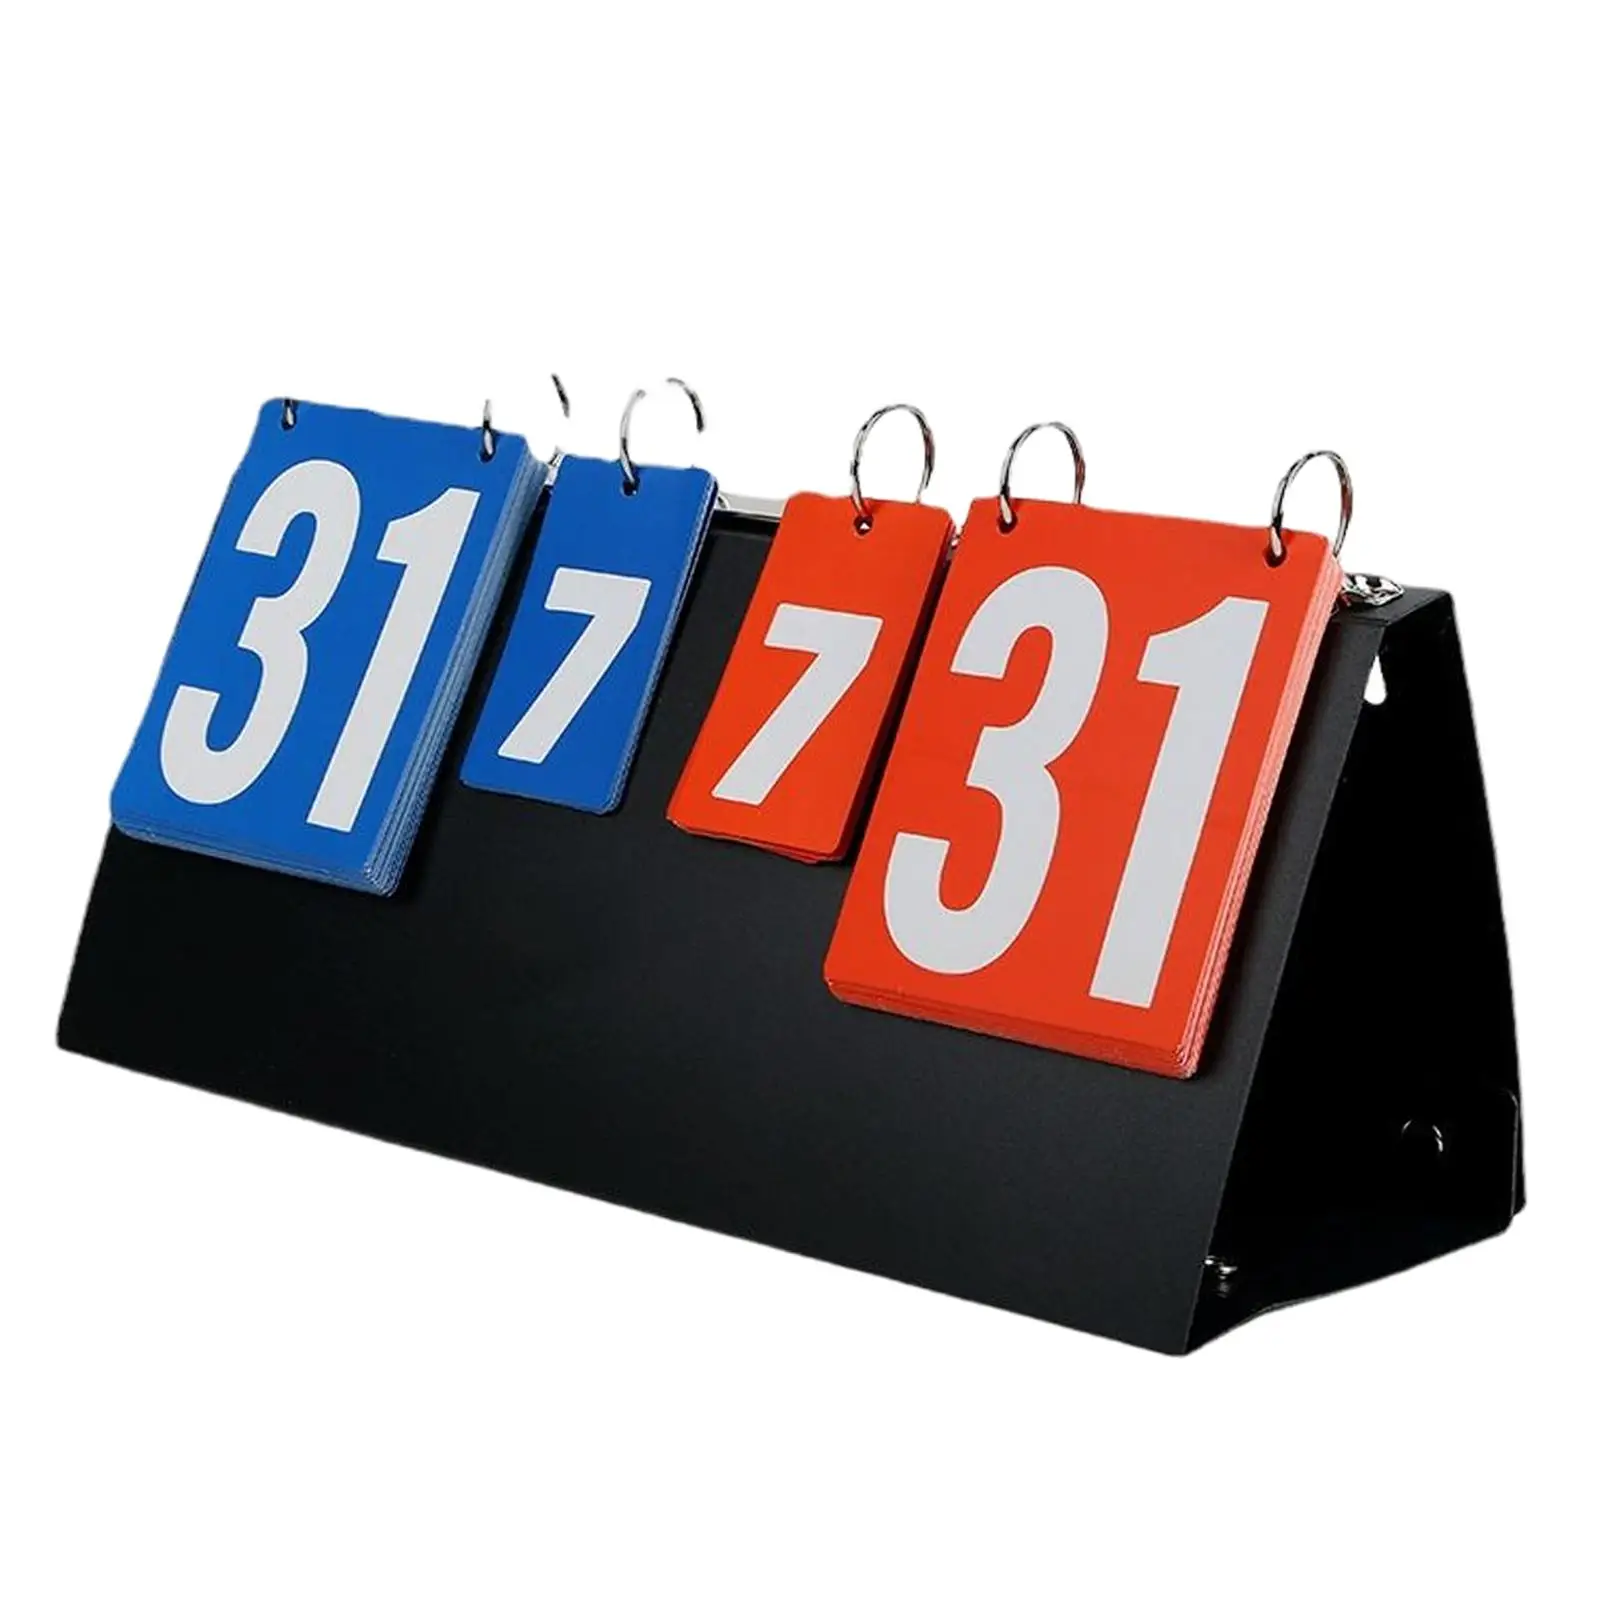 

4 Digits Score Board Score Keeper Competition Table Scoreboard for Basketball Badminton Volleyball Indoor Outdoor Sports